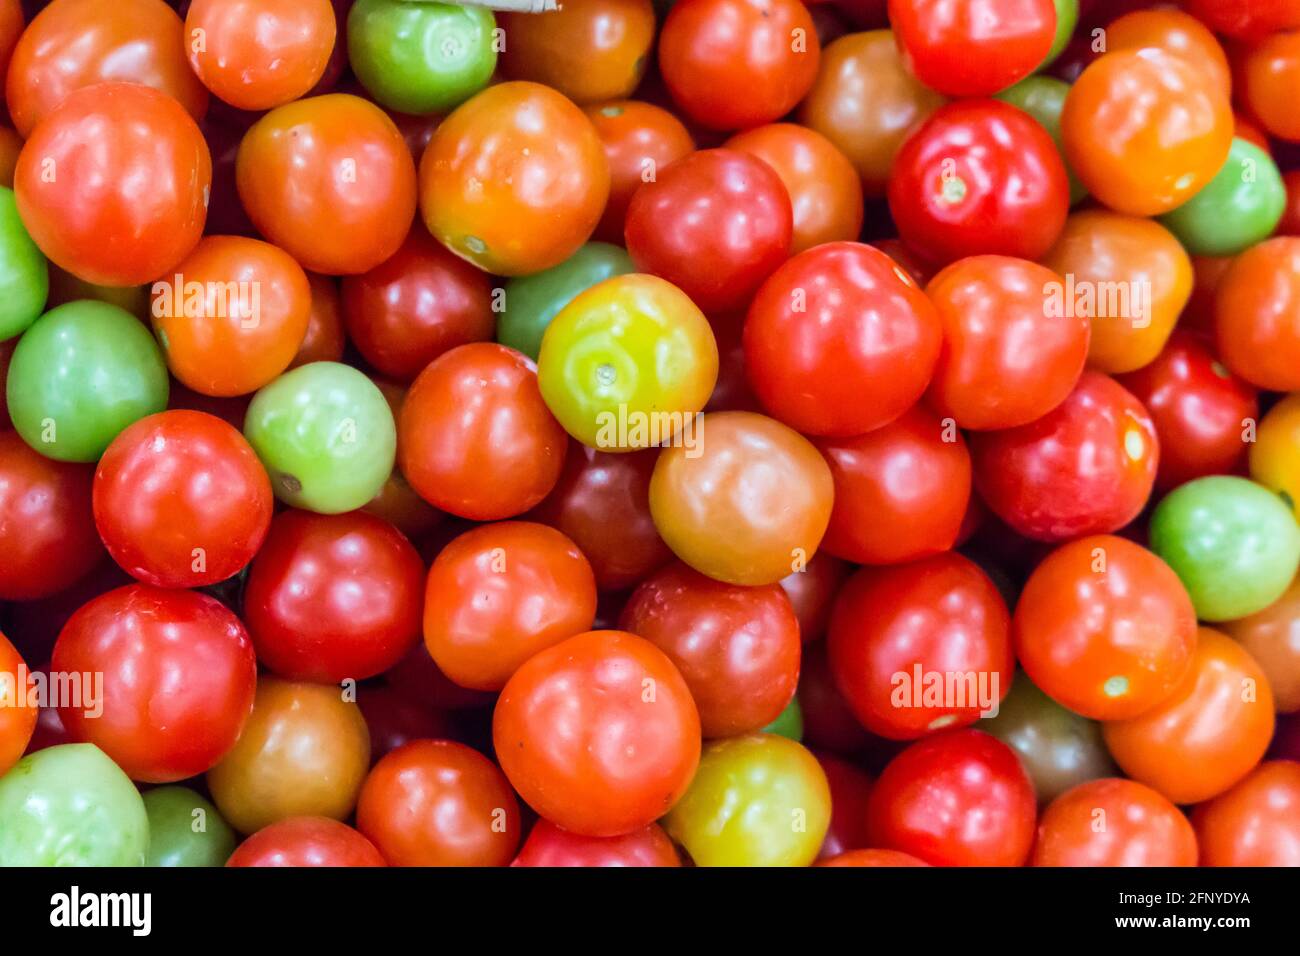 Alot of colorful tomatoes background Stock Photo